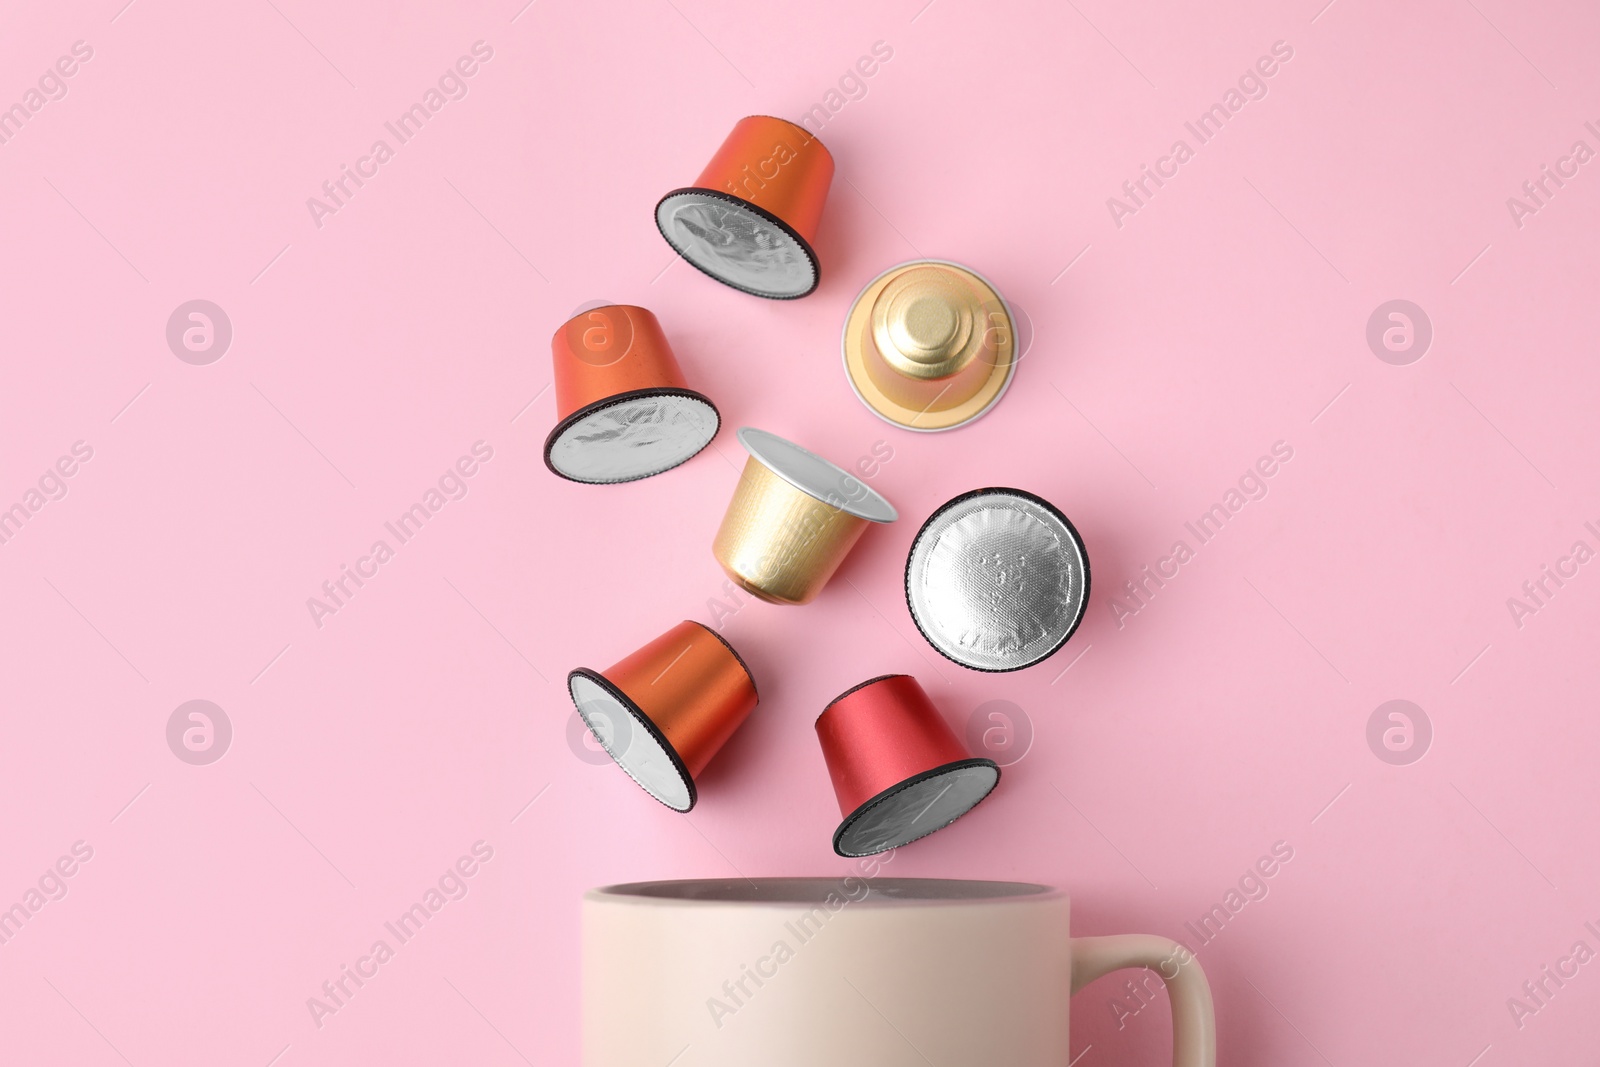 Photo of Many coffee capsules and cup on pink background, top view